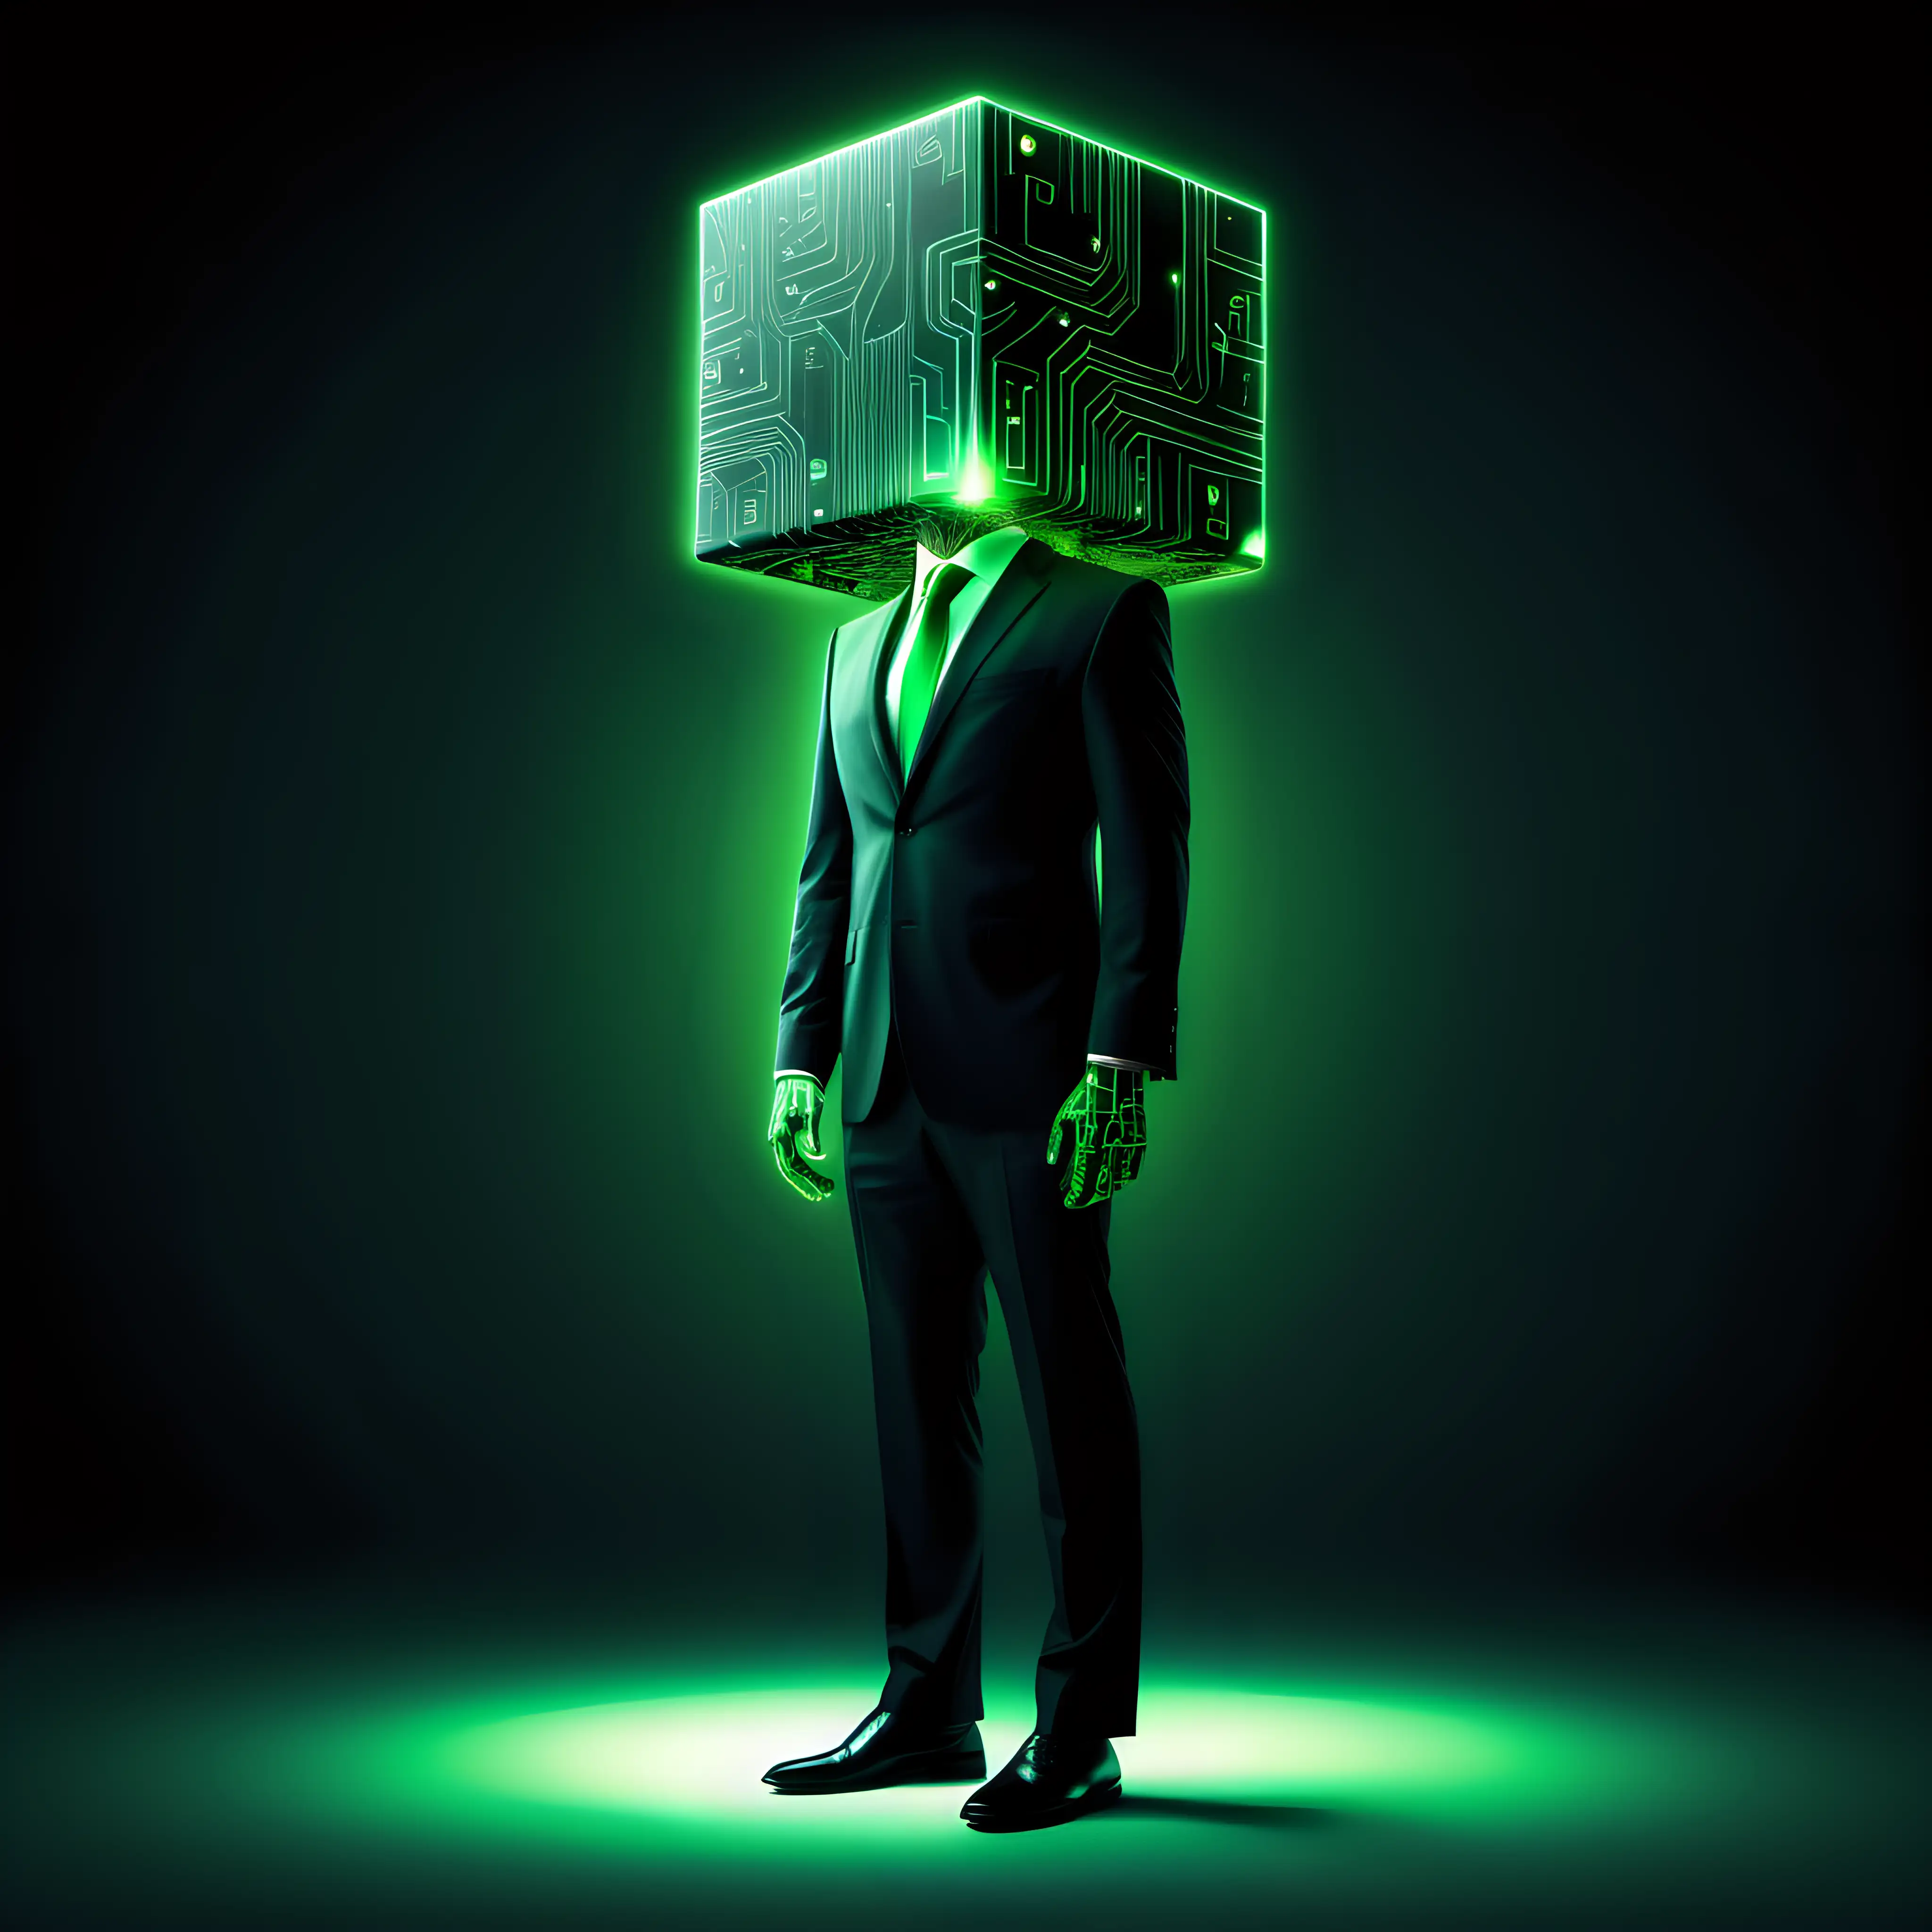 black cube as a head.
human body.
wearing a business suit.
glowing green circuits cover its body.
full body image.
